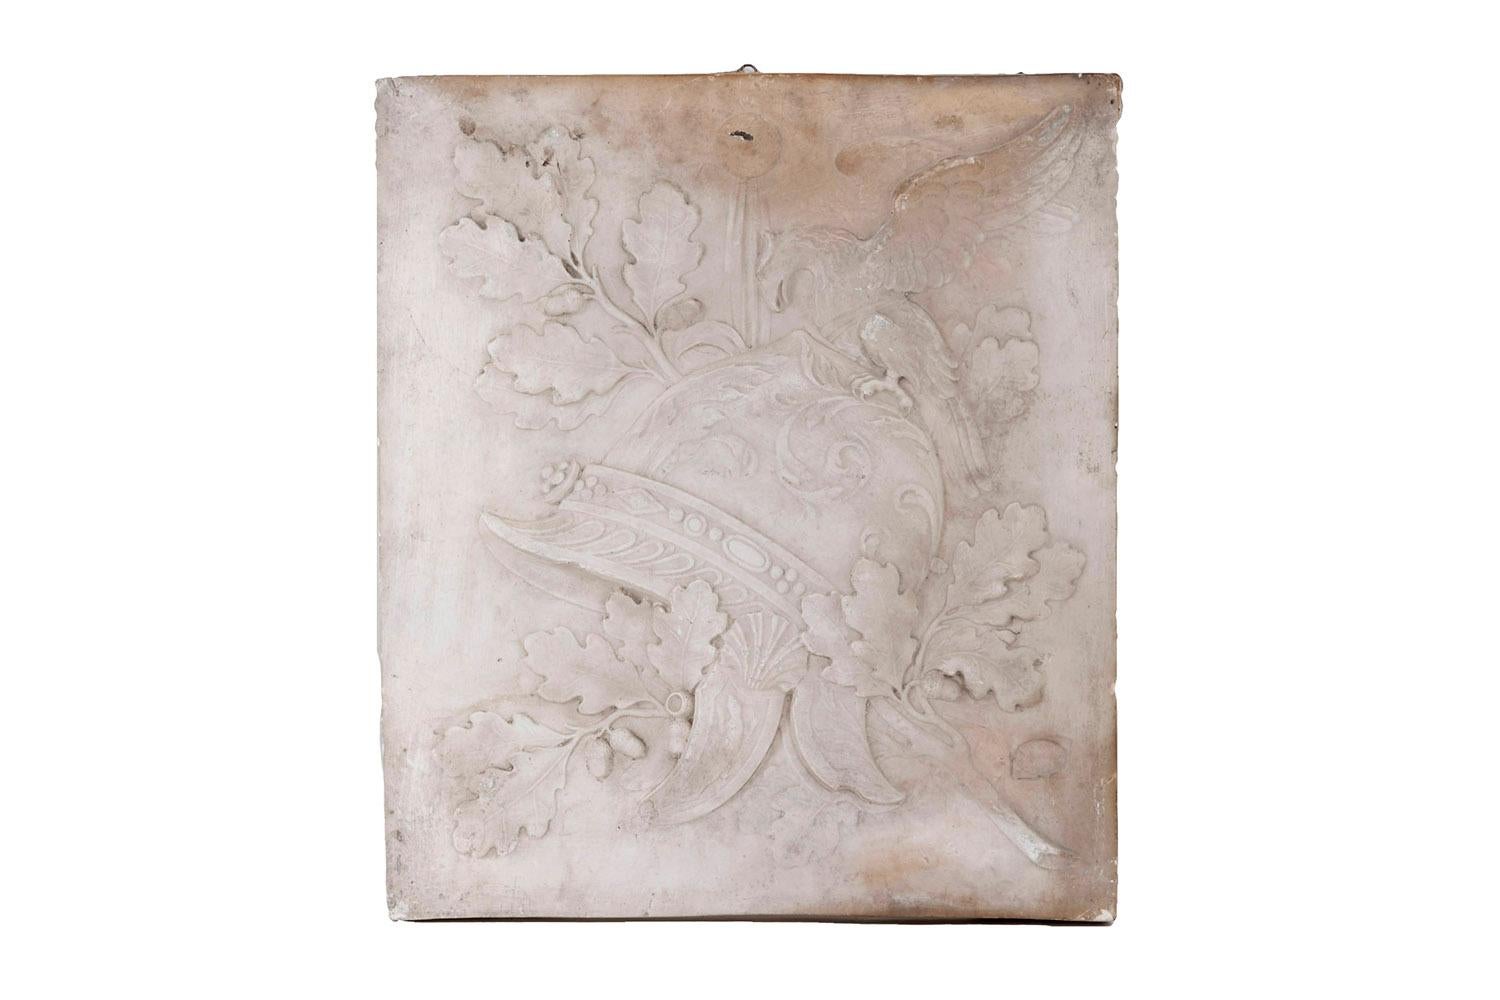 Stucco low-relief figuring the Victory allegory. Military helmet central motif adorned with foliar ornaments, gadroons, shell and salamander. It’s crowned with an eagle and rests on oak branches, leaves and acorns.
Hollow stamp on the bottom right